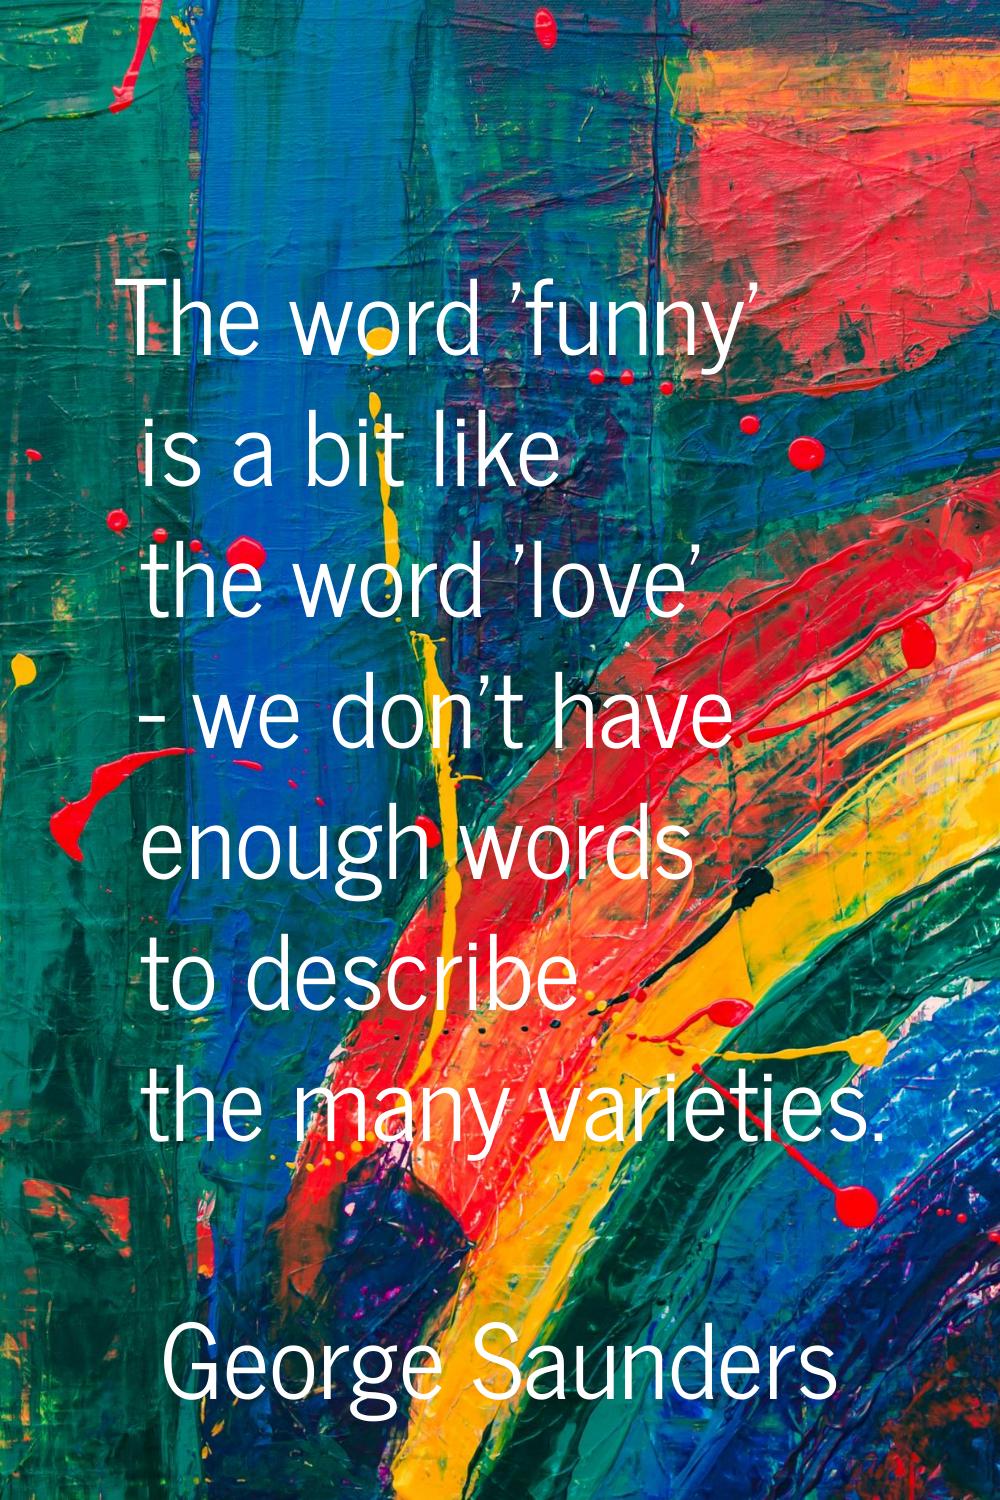 The word 'funny' is a bit like the word 'love' - we don't have enough words to describe the many va